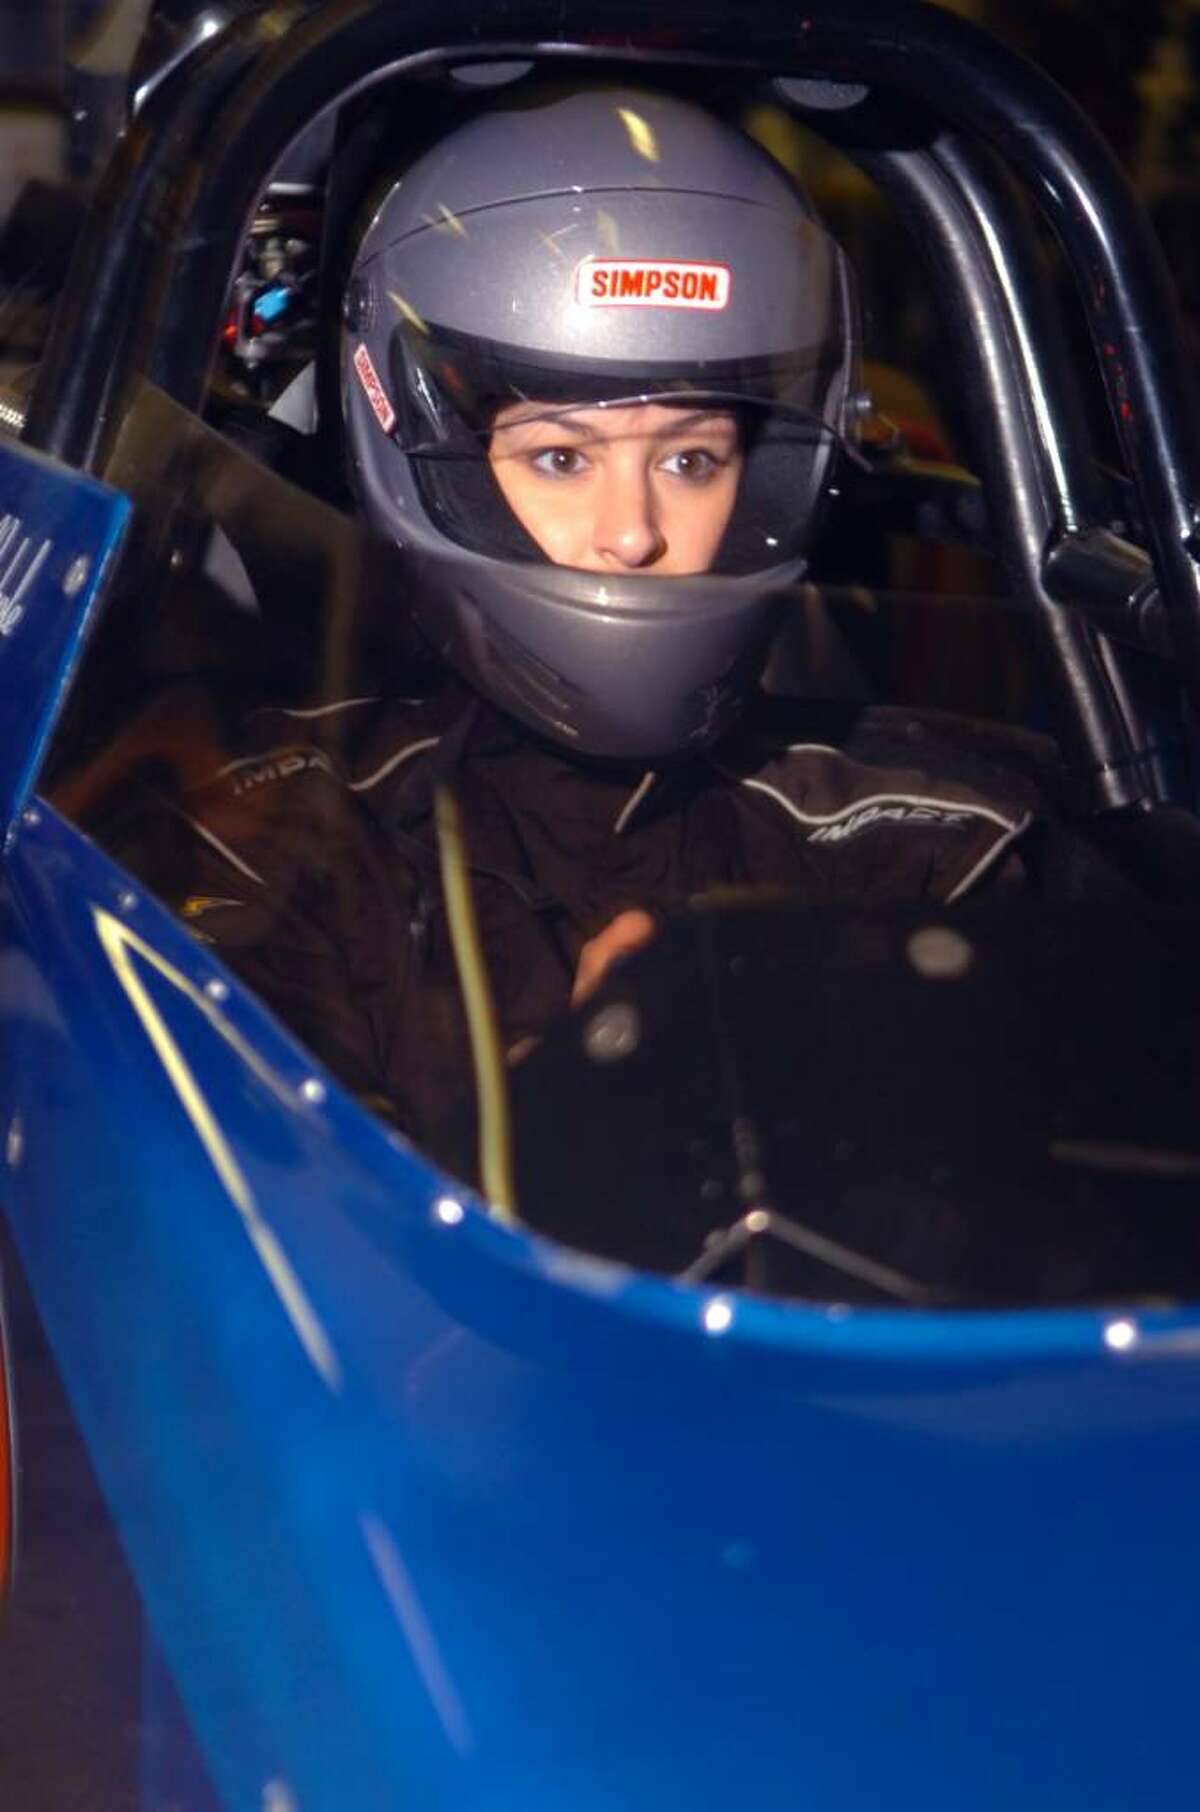 Kaitlyn Sobeski, a 24-year-old Greenwich High School graduate and former cheerleader, who is now learning to race a rear-engine dragster in Florida. She sits in the dragster, on January 24, 2010, in her father, Scotty Sobeski's, garage. Her first race will be in March.